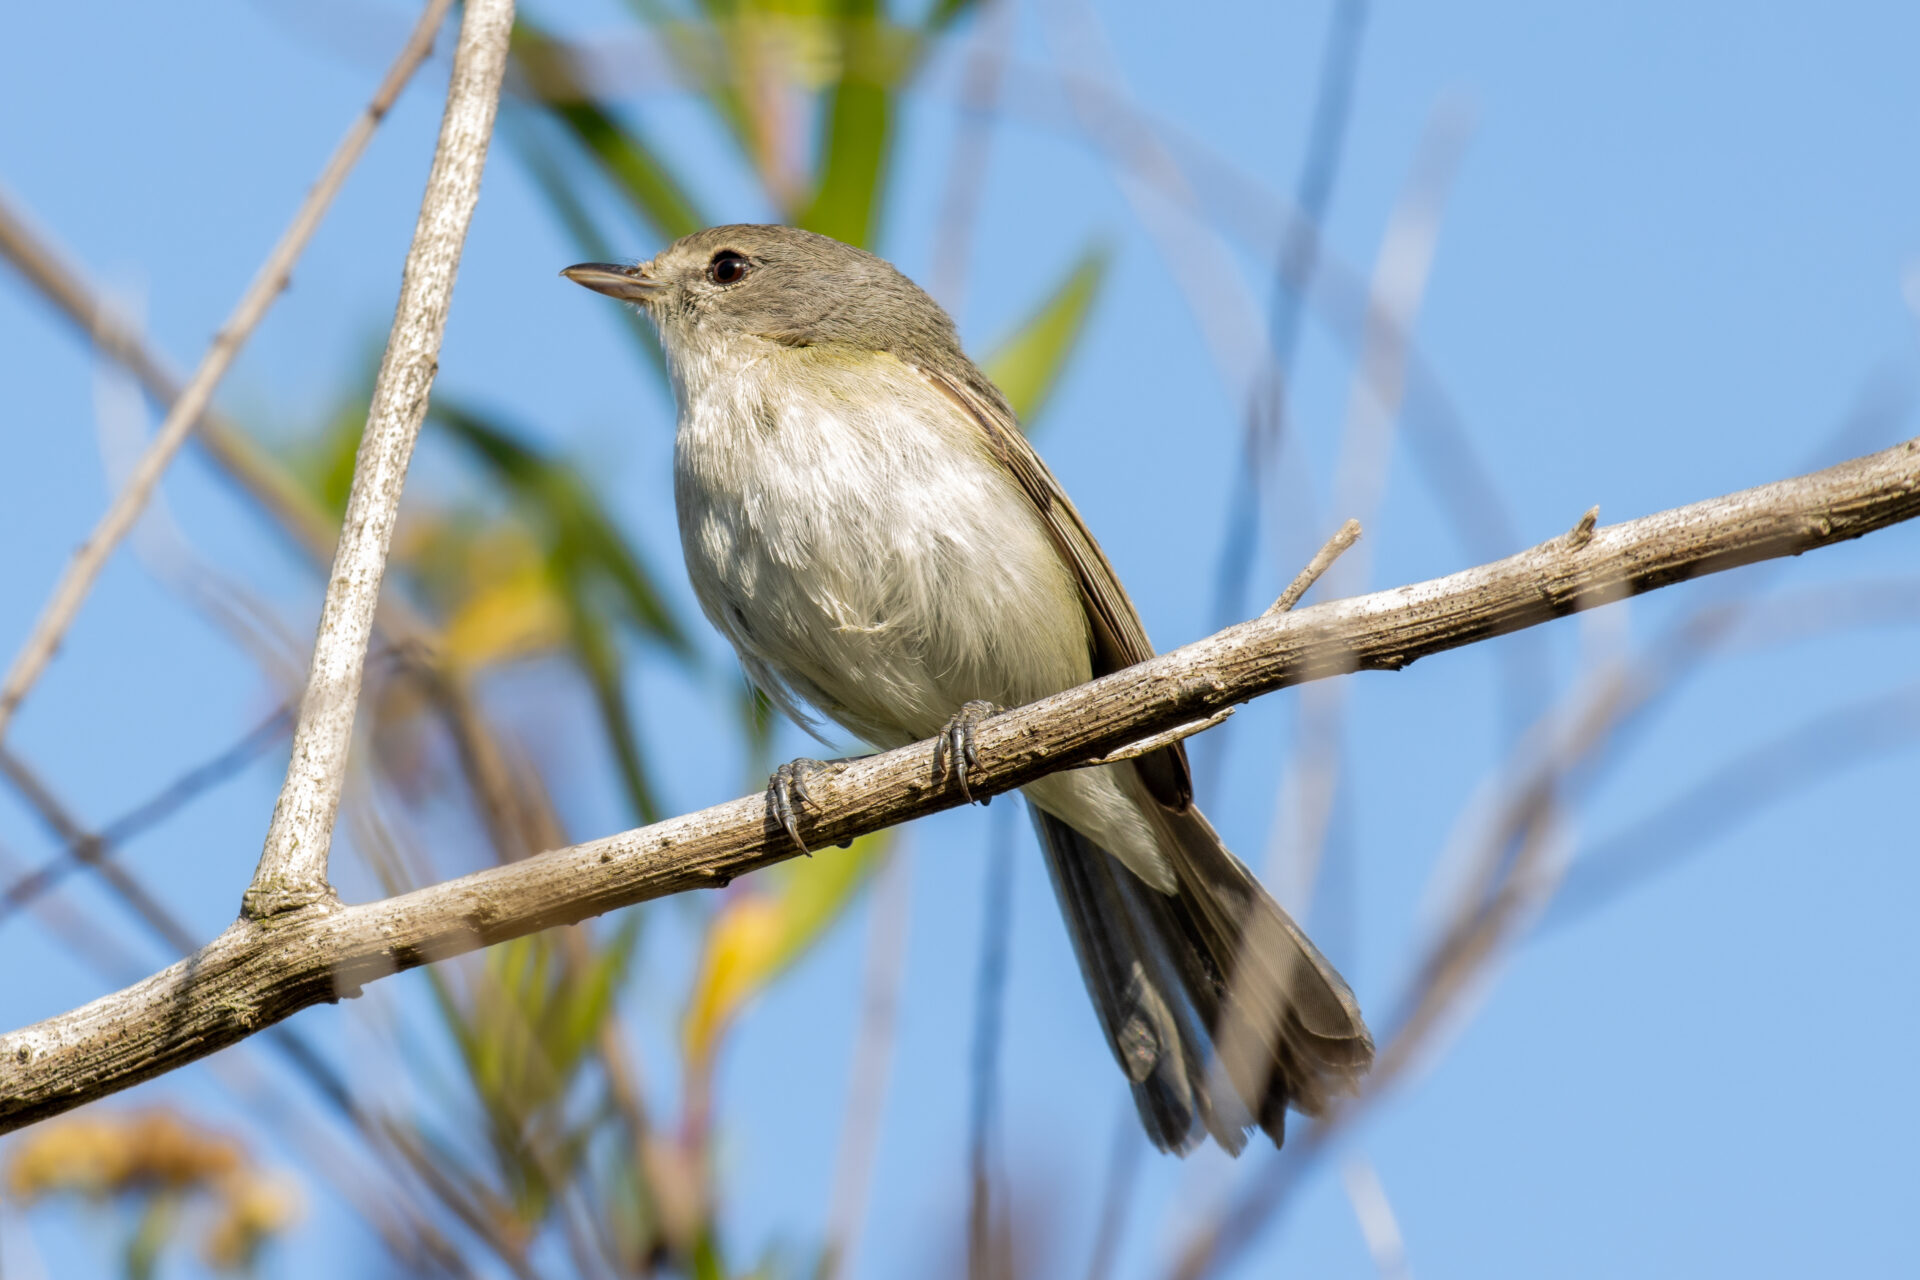 Least Bell's Vireo Perched in Tree